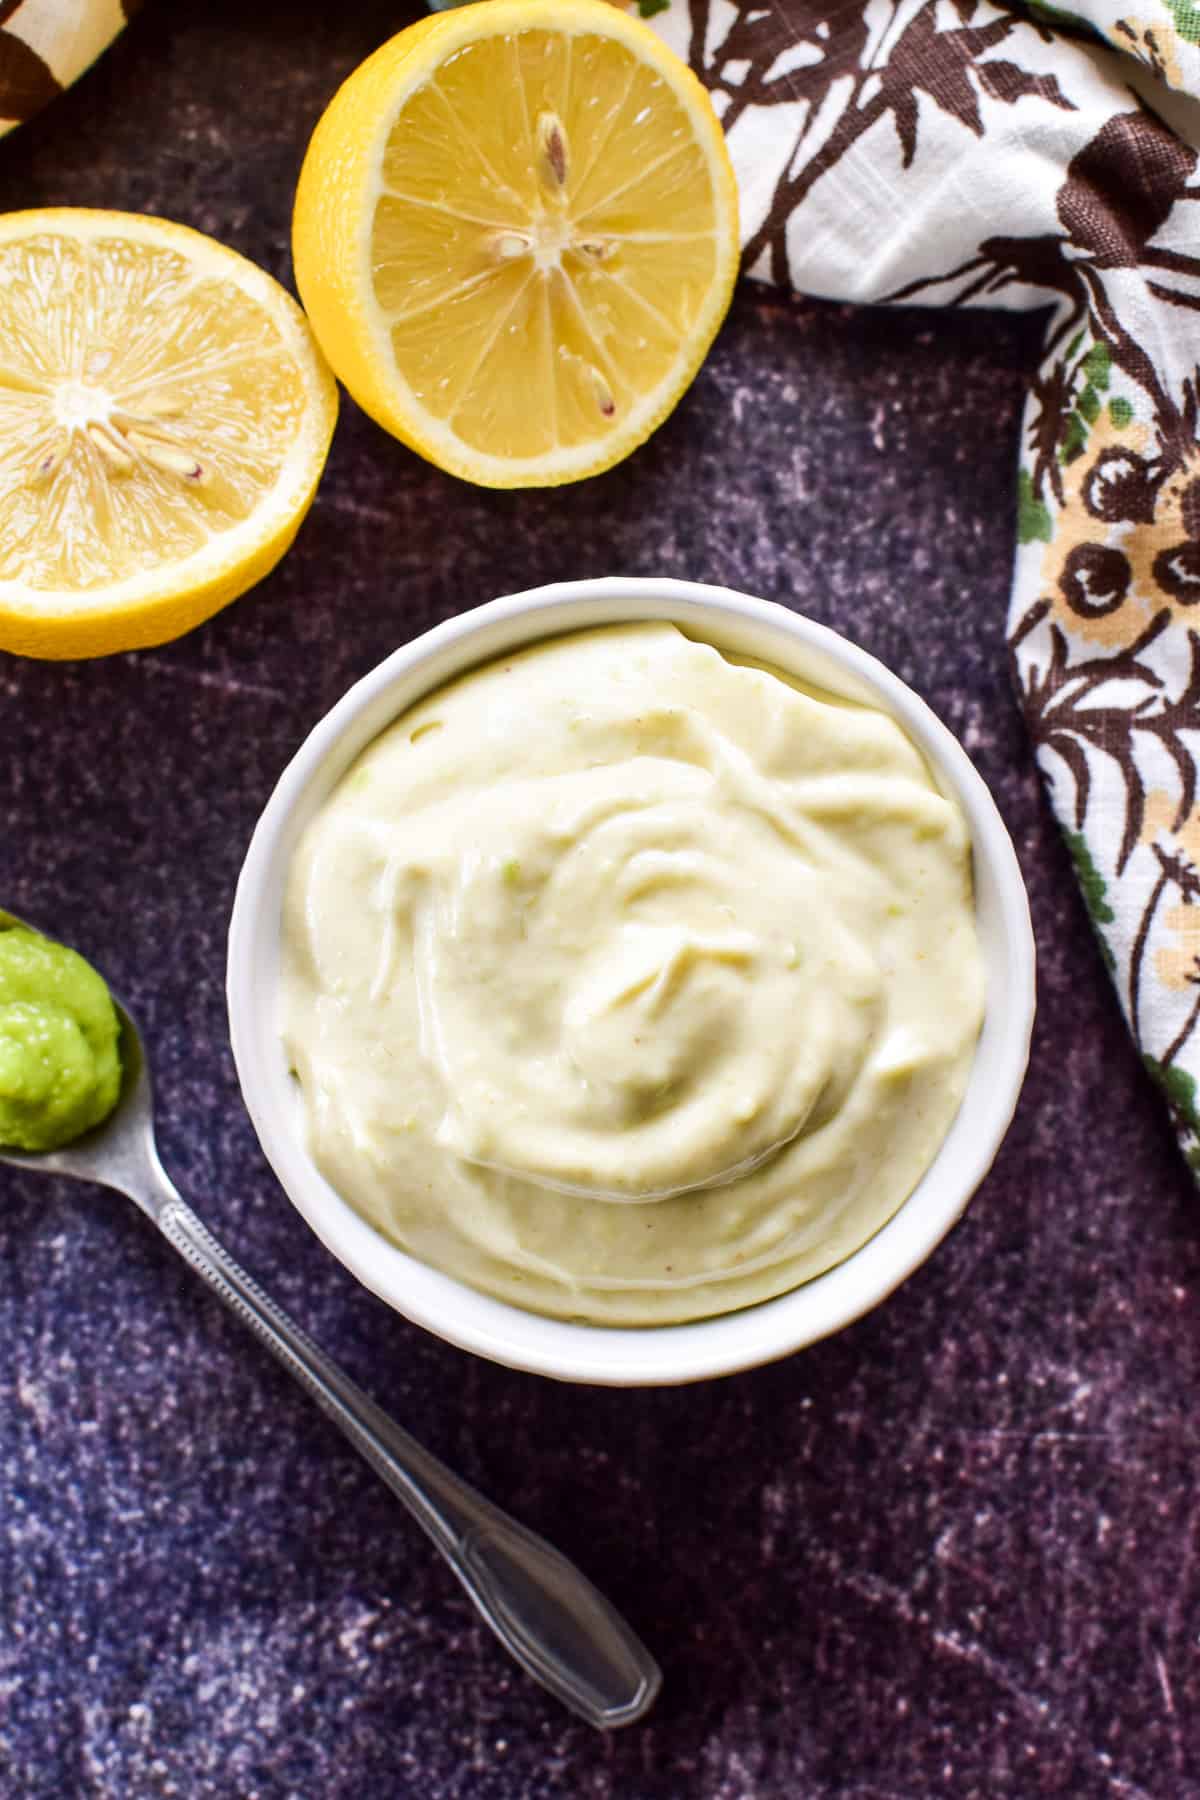 Creamy wasabi mayo with lemon in a small container